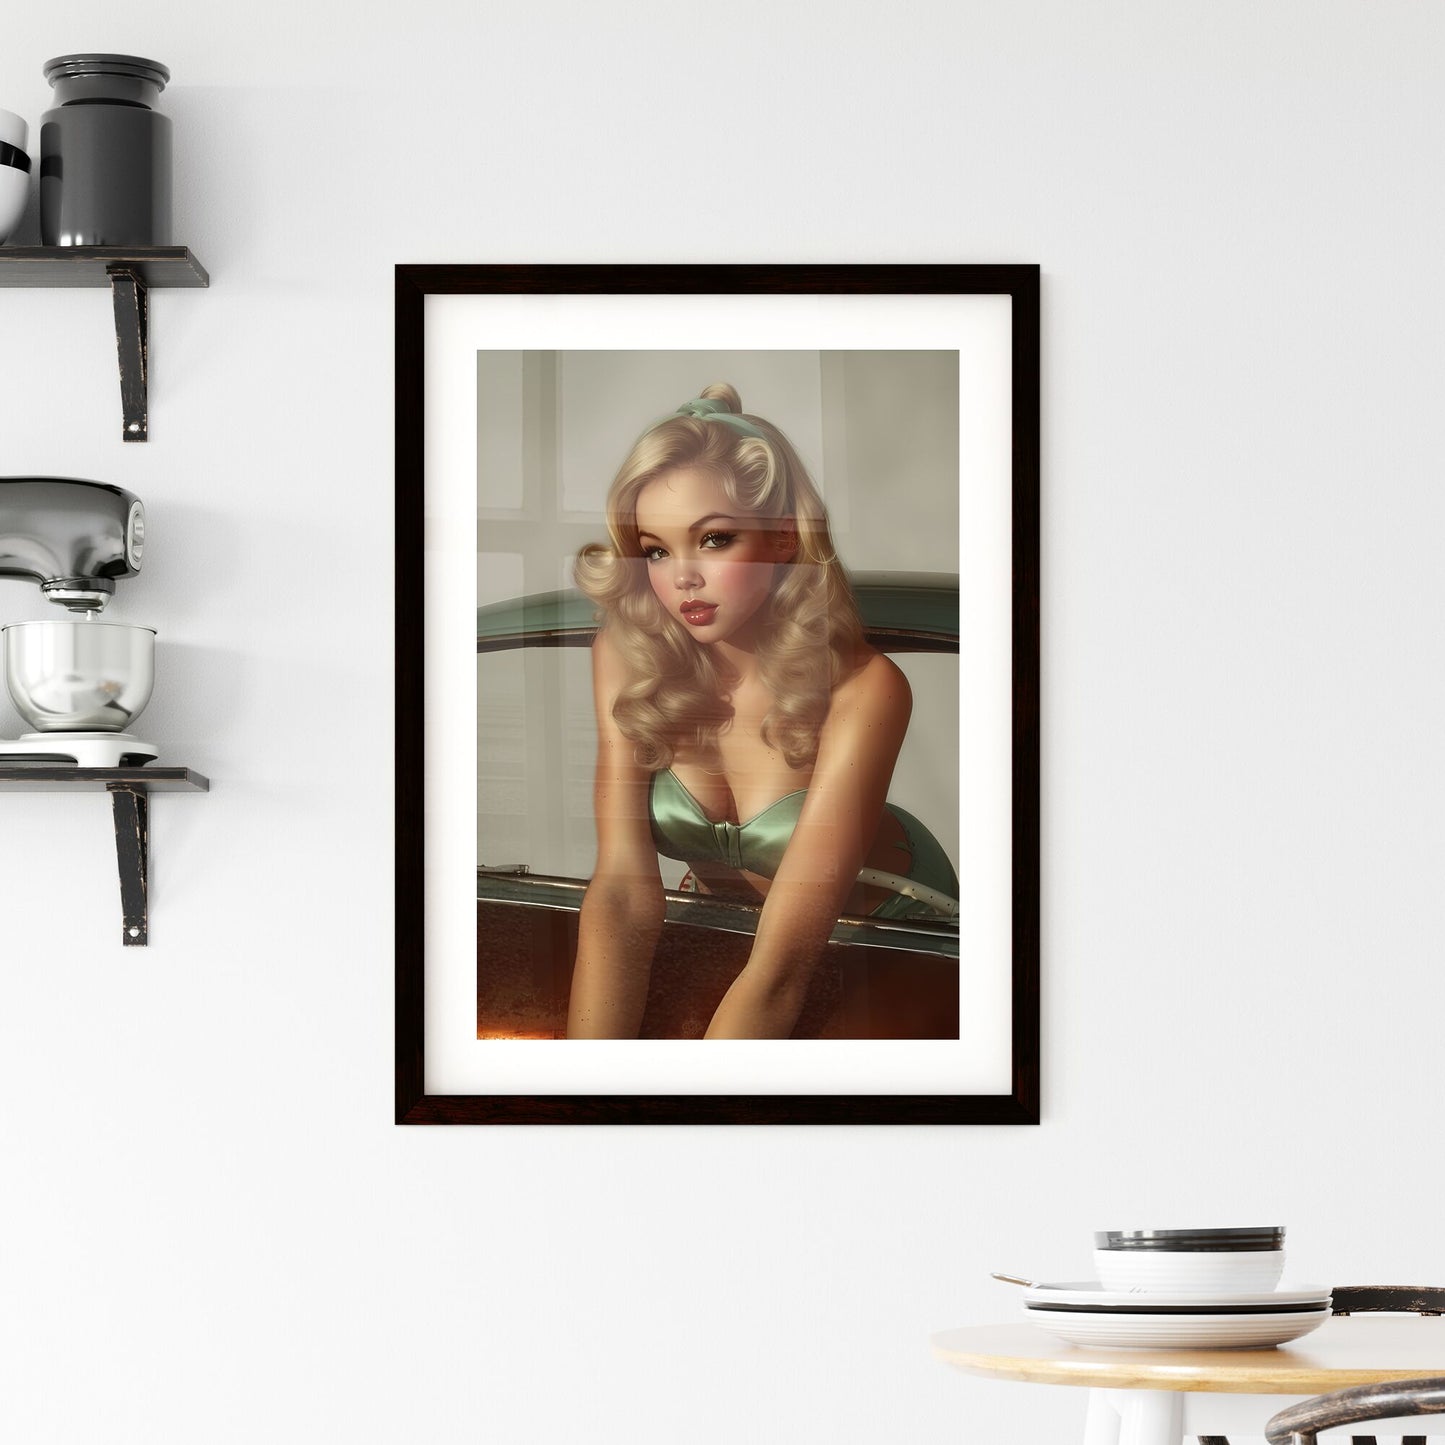 The vintage pin up girl leaning on a car - Art print of a woman in a garment leaning on a car Default Title